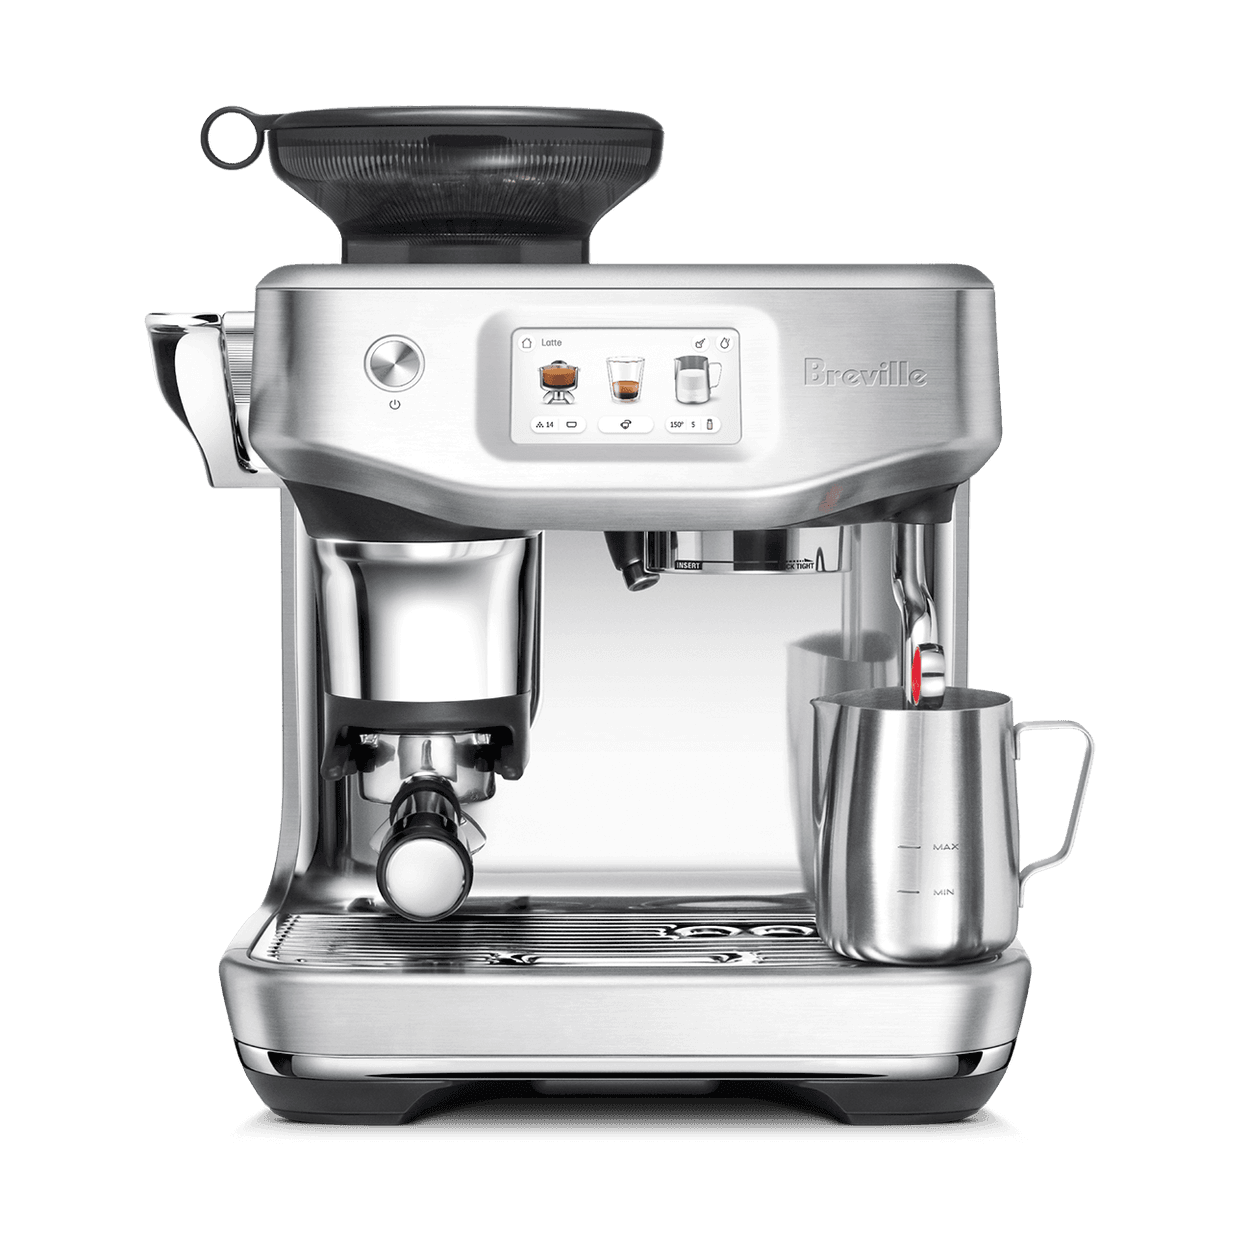 The Breville Barista Touch Impress